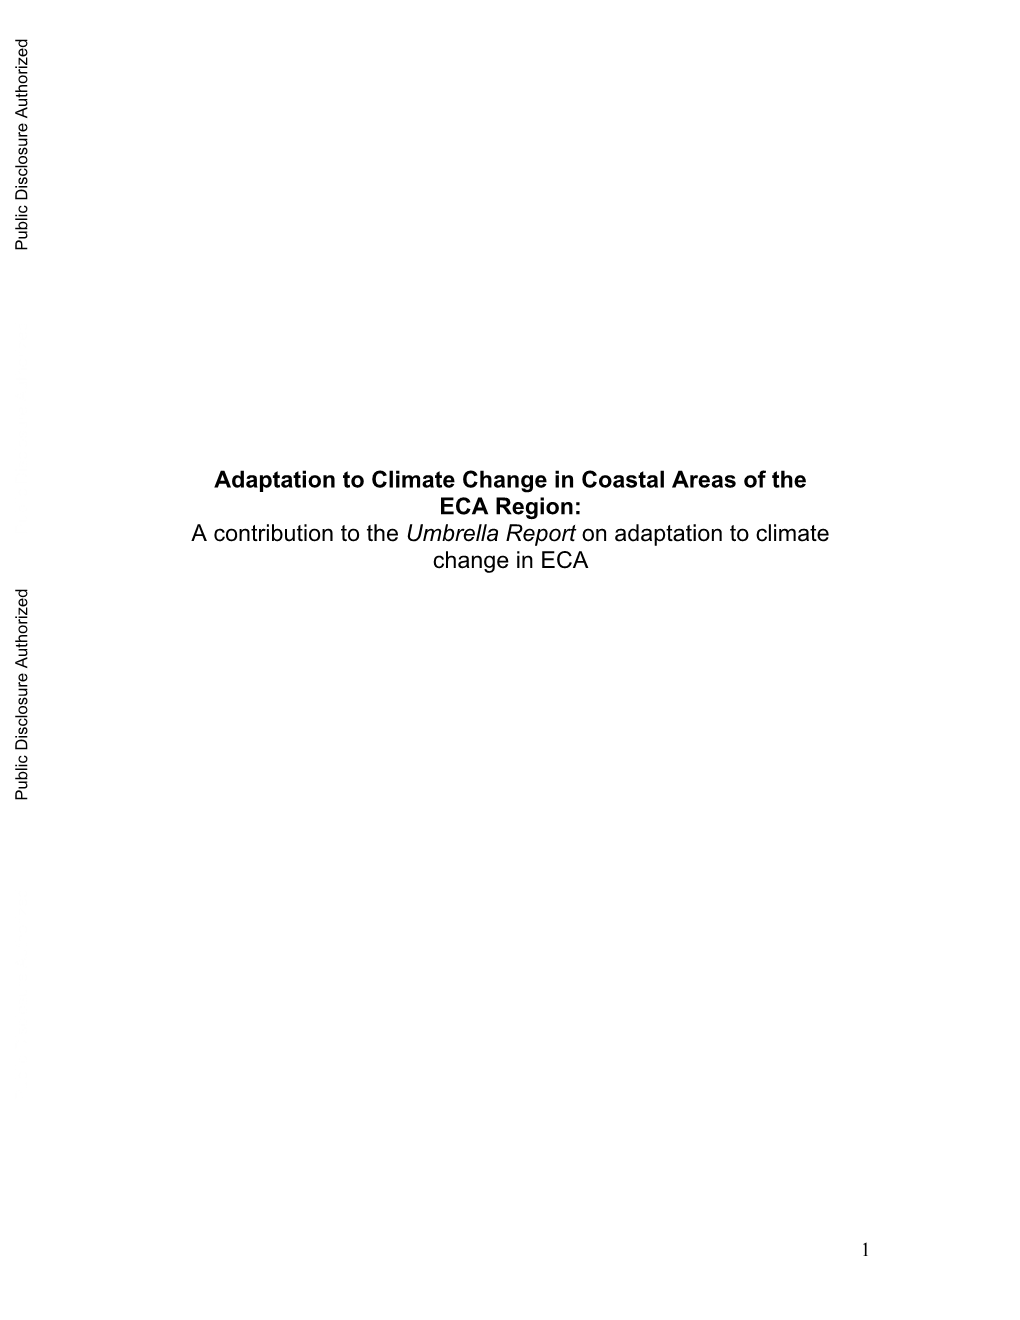 Adaptation to Climate Change in Coastal Areas of the ECA Region